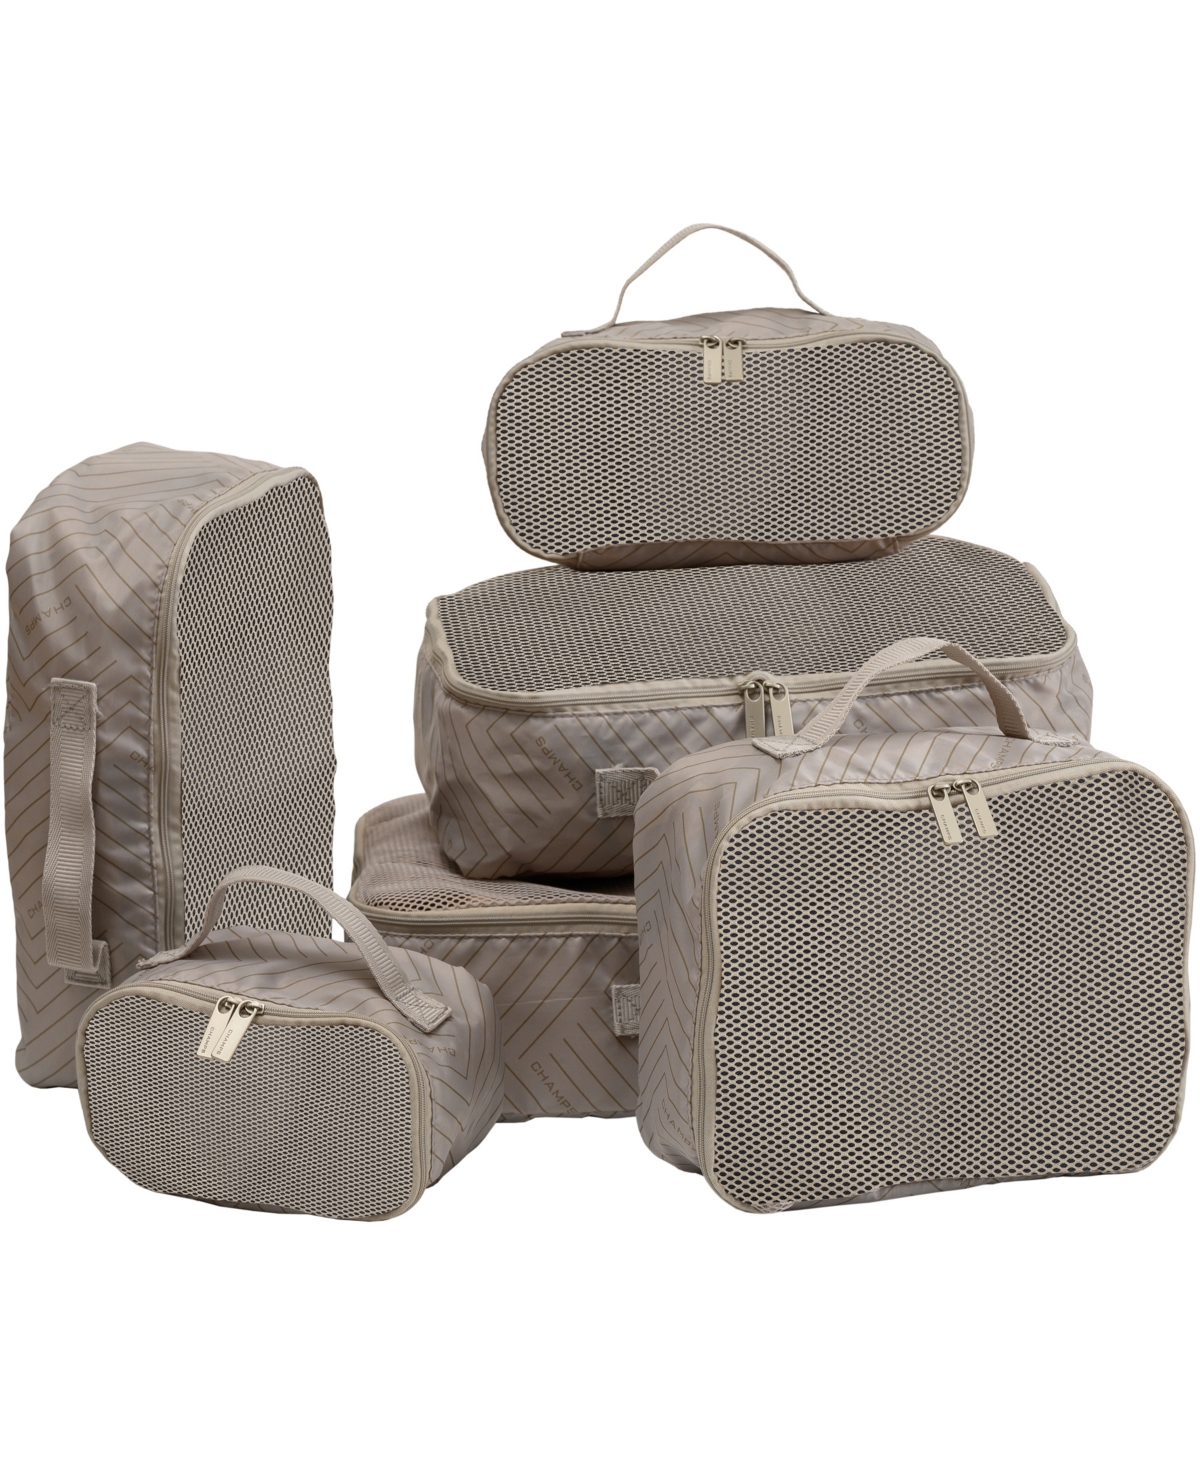 Packing Cubes - 6 Piece Set - Off White